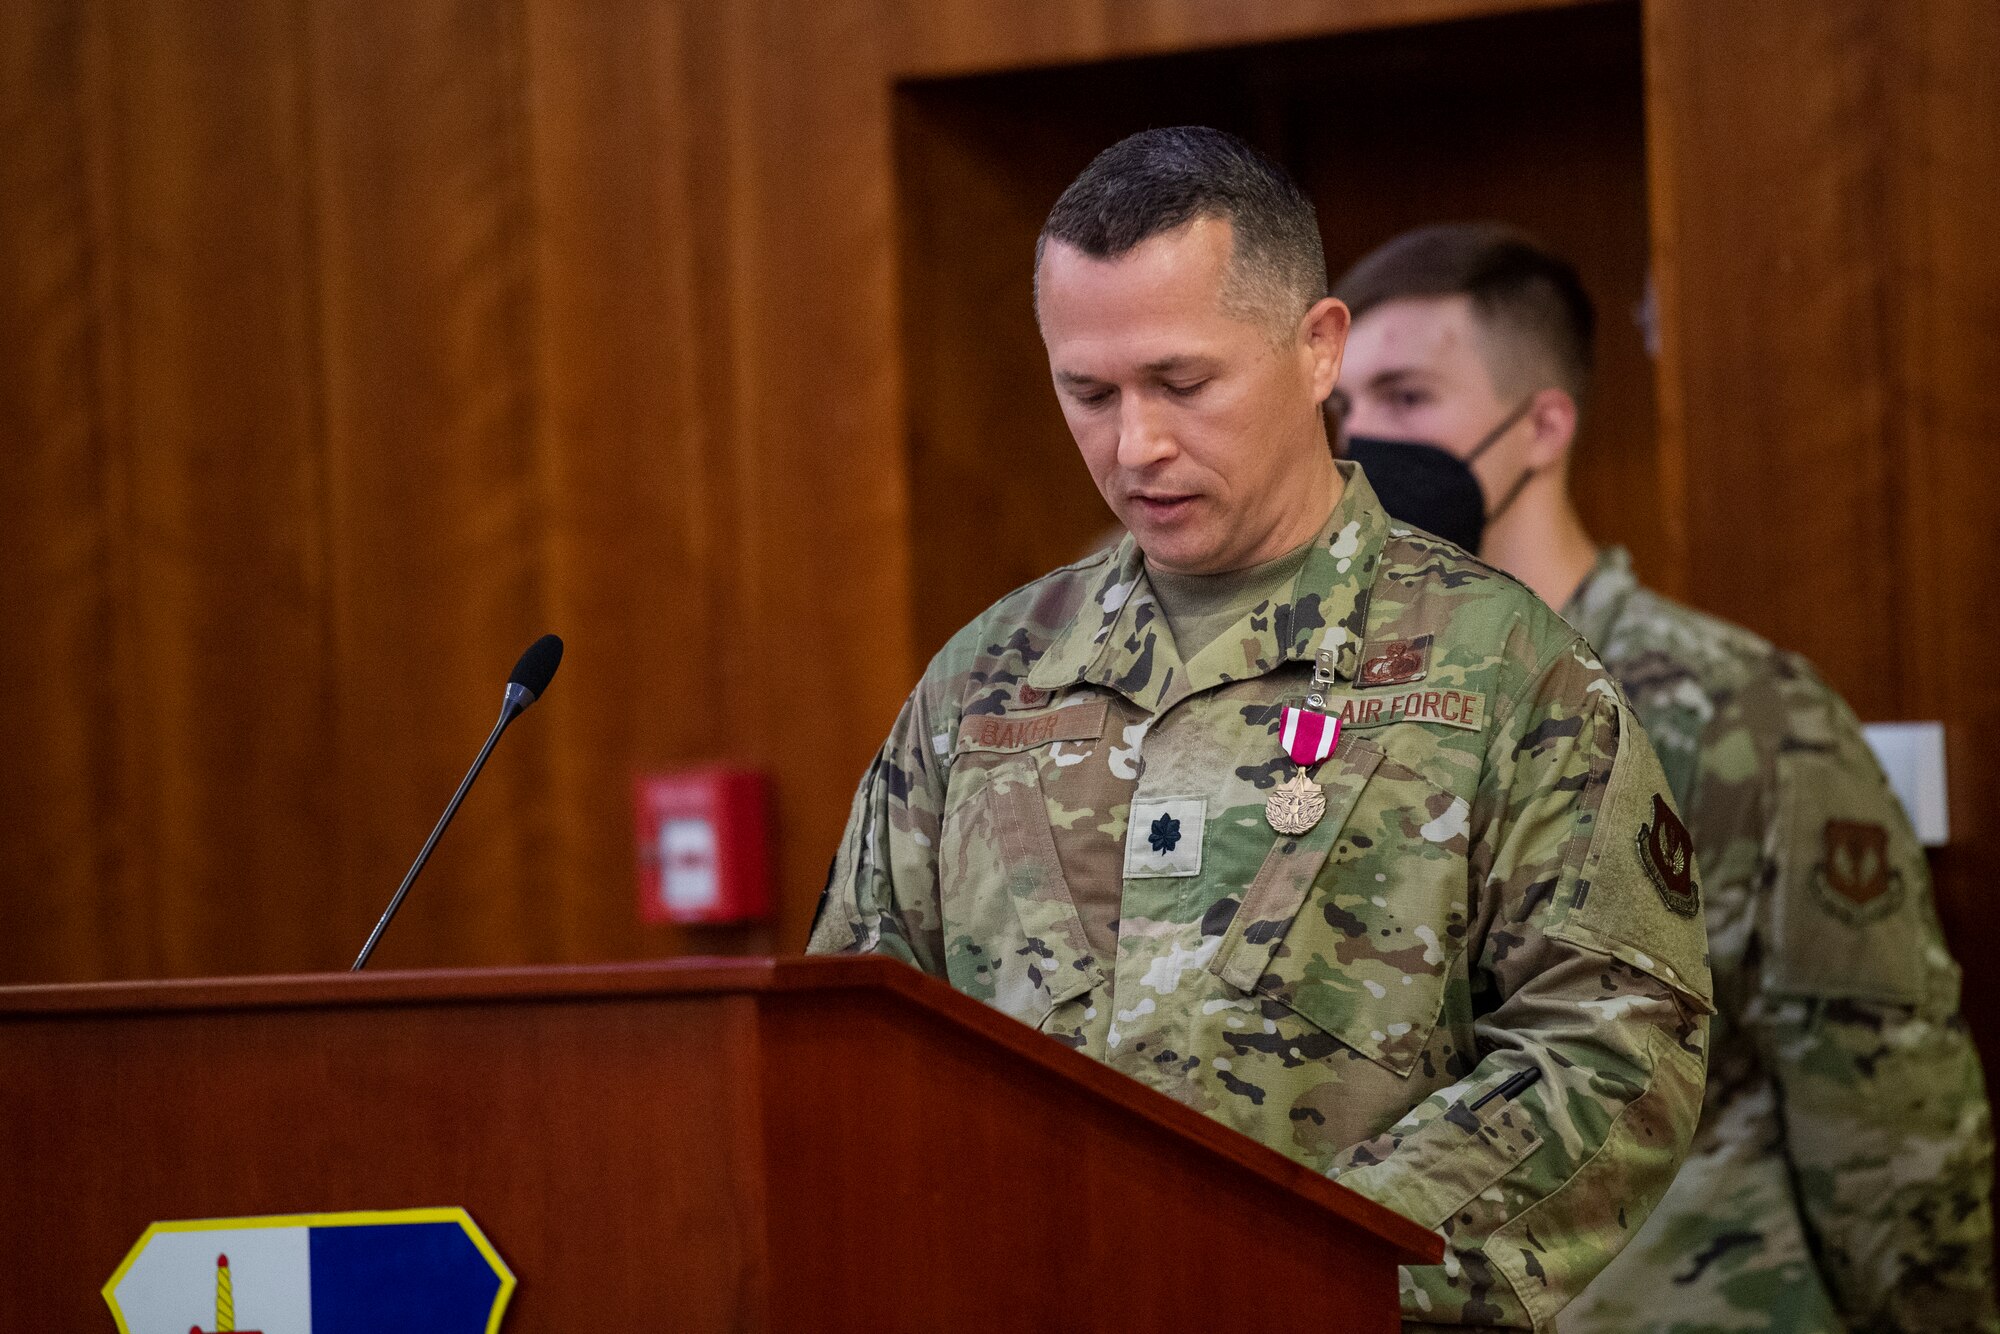 U.S. Air Force Lt. Col. Adam Baker, outgoing 52nd Force Support Squadron commander, addresses the crowd at the 52nd FSS change of command ceremony July 6, 2021, on Spangdahlem Air Base, Germany. During the ceremony, Baker relinquished command to U.S. Air Force Maj. Ingrid Muniz. (U.S. Air Force photo by Senior Airman Ali Stewart)